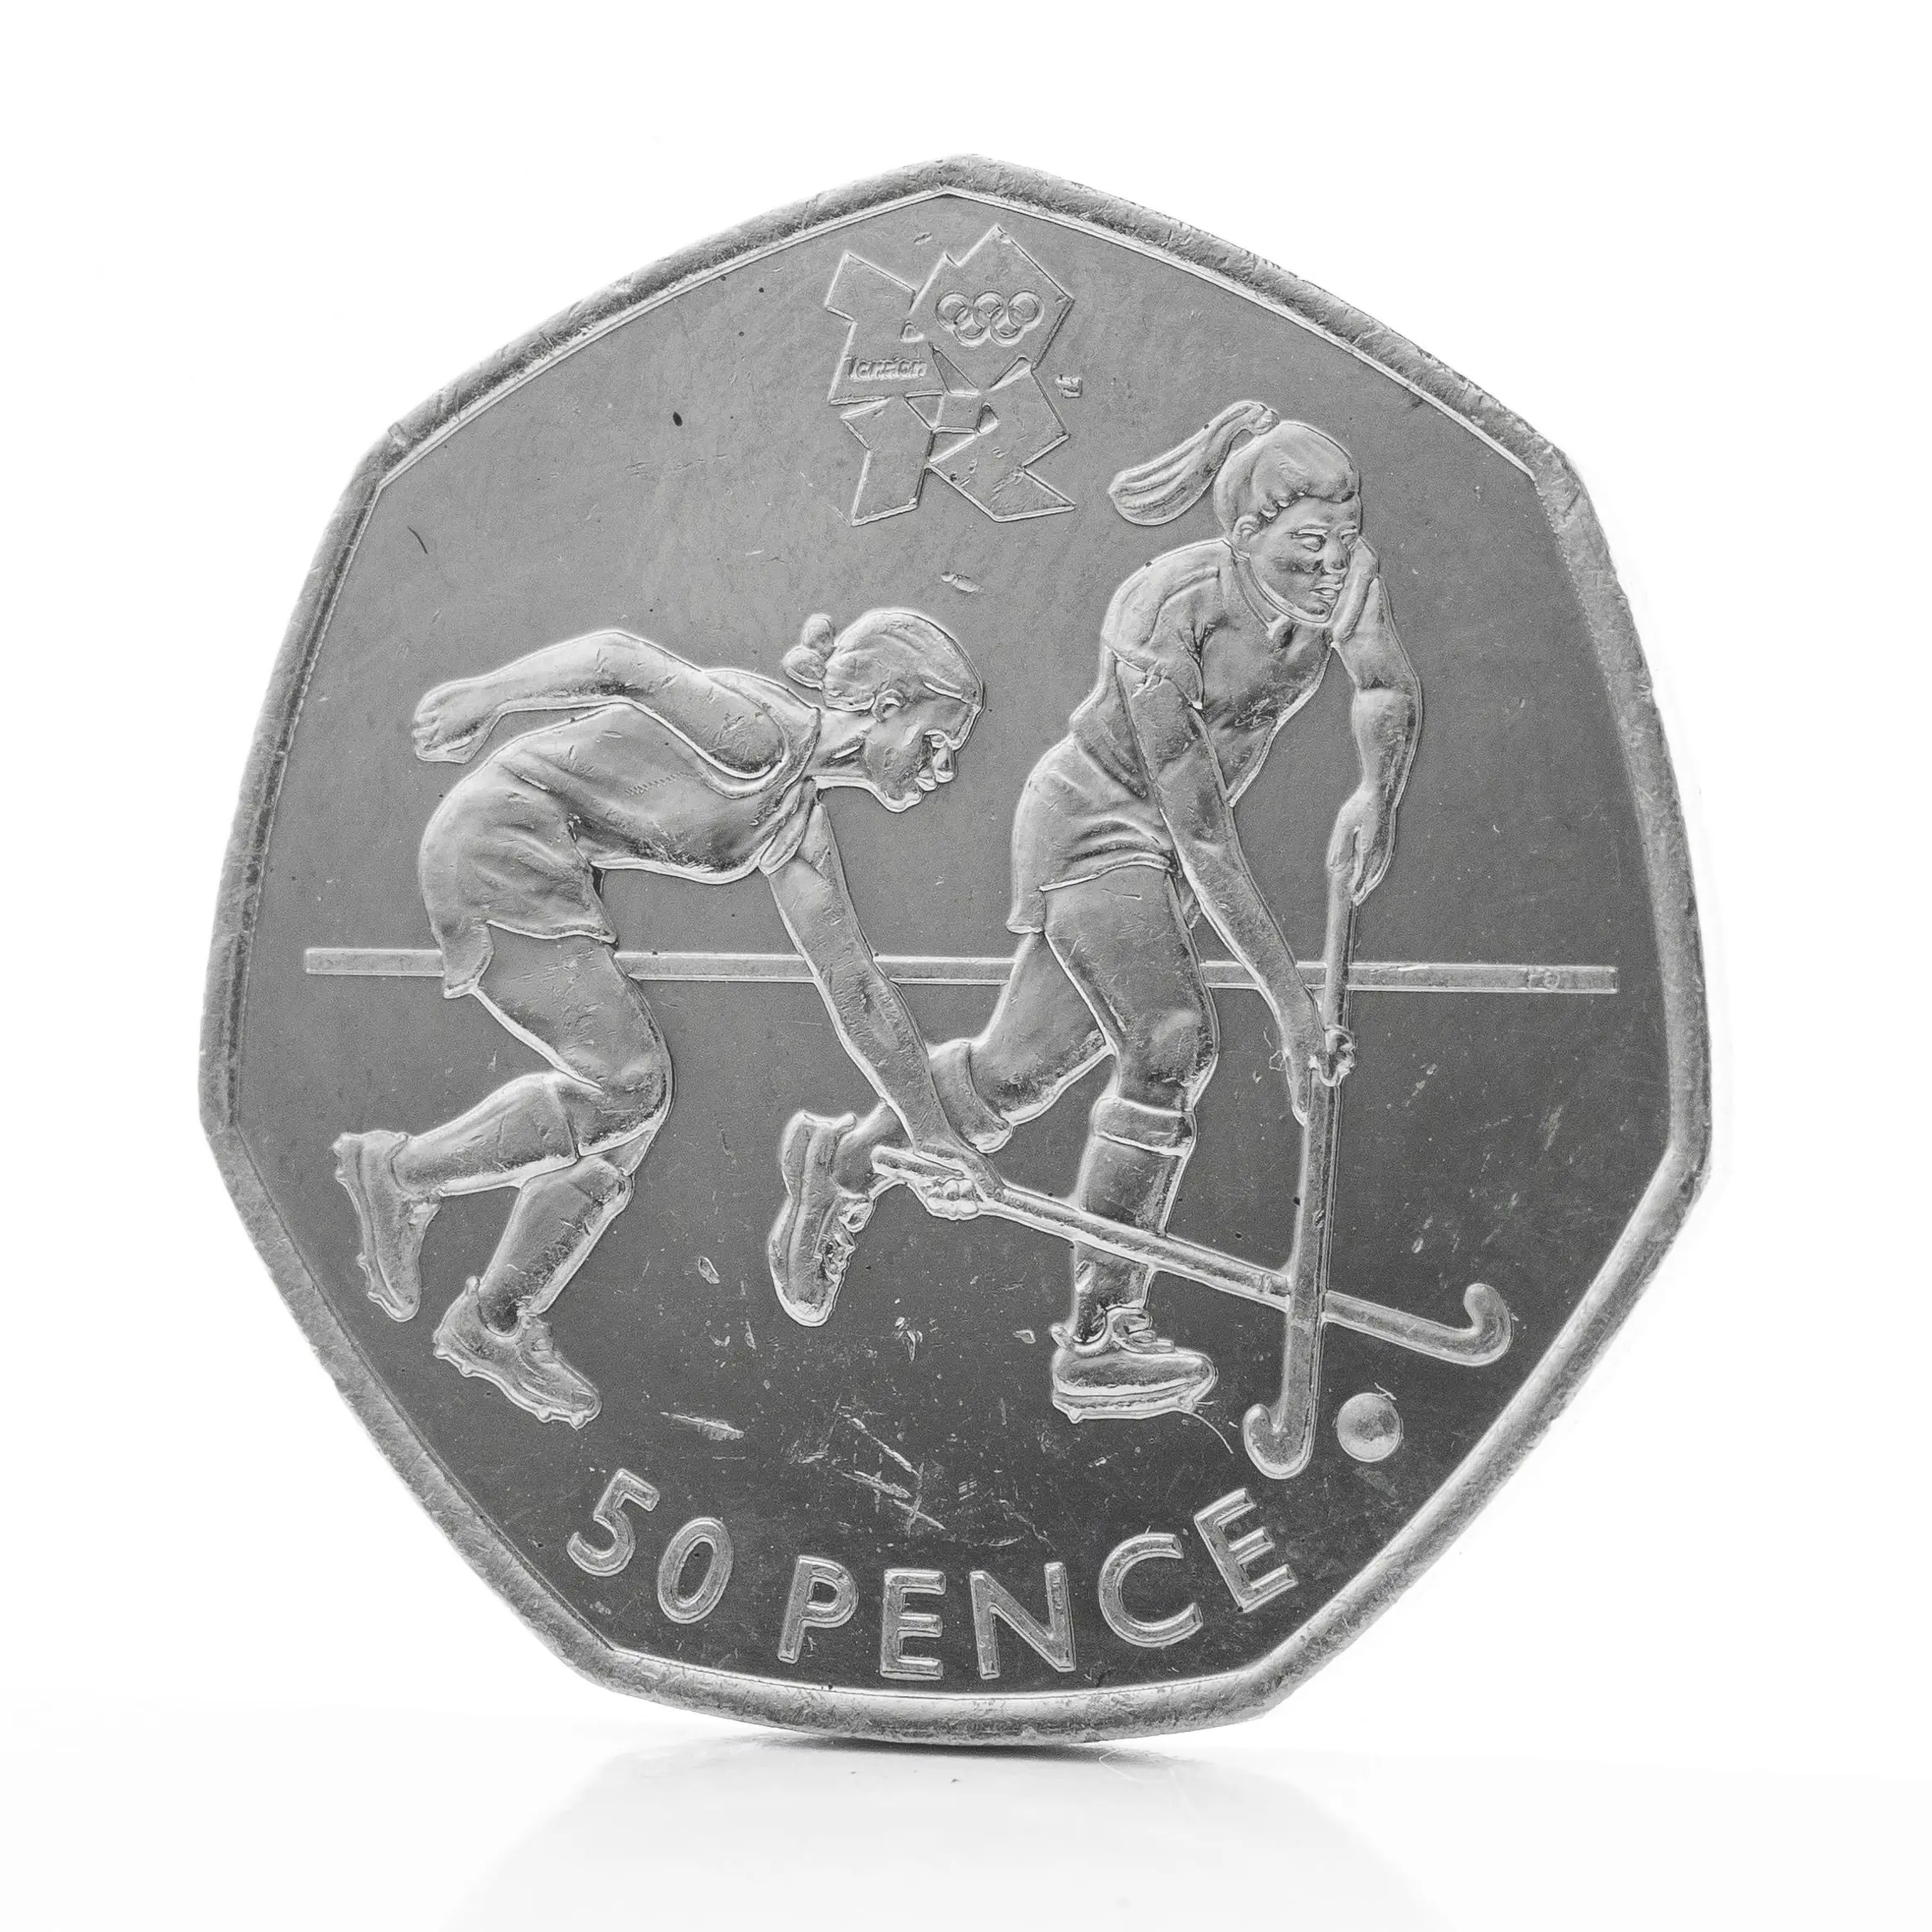 Reverse Side Design of the Hockey 50 Pence Coin